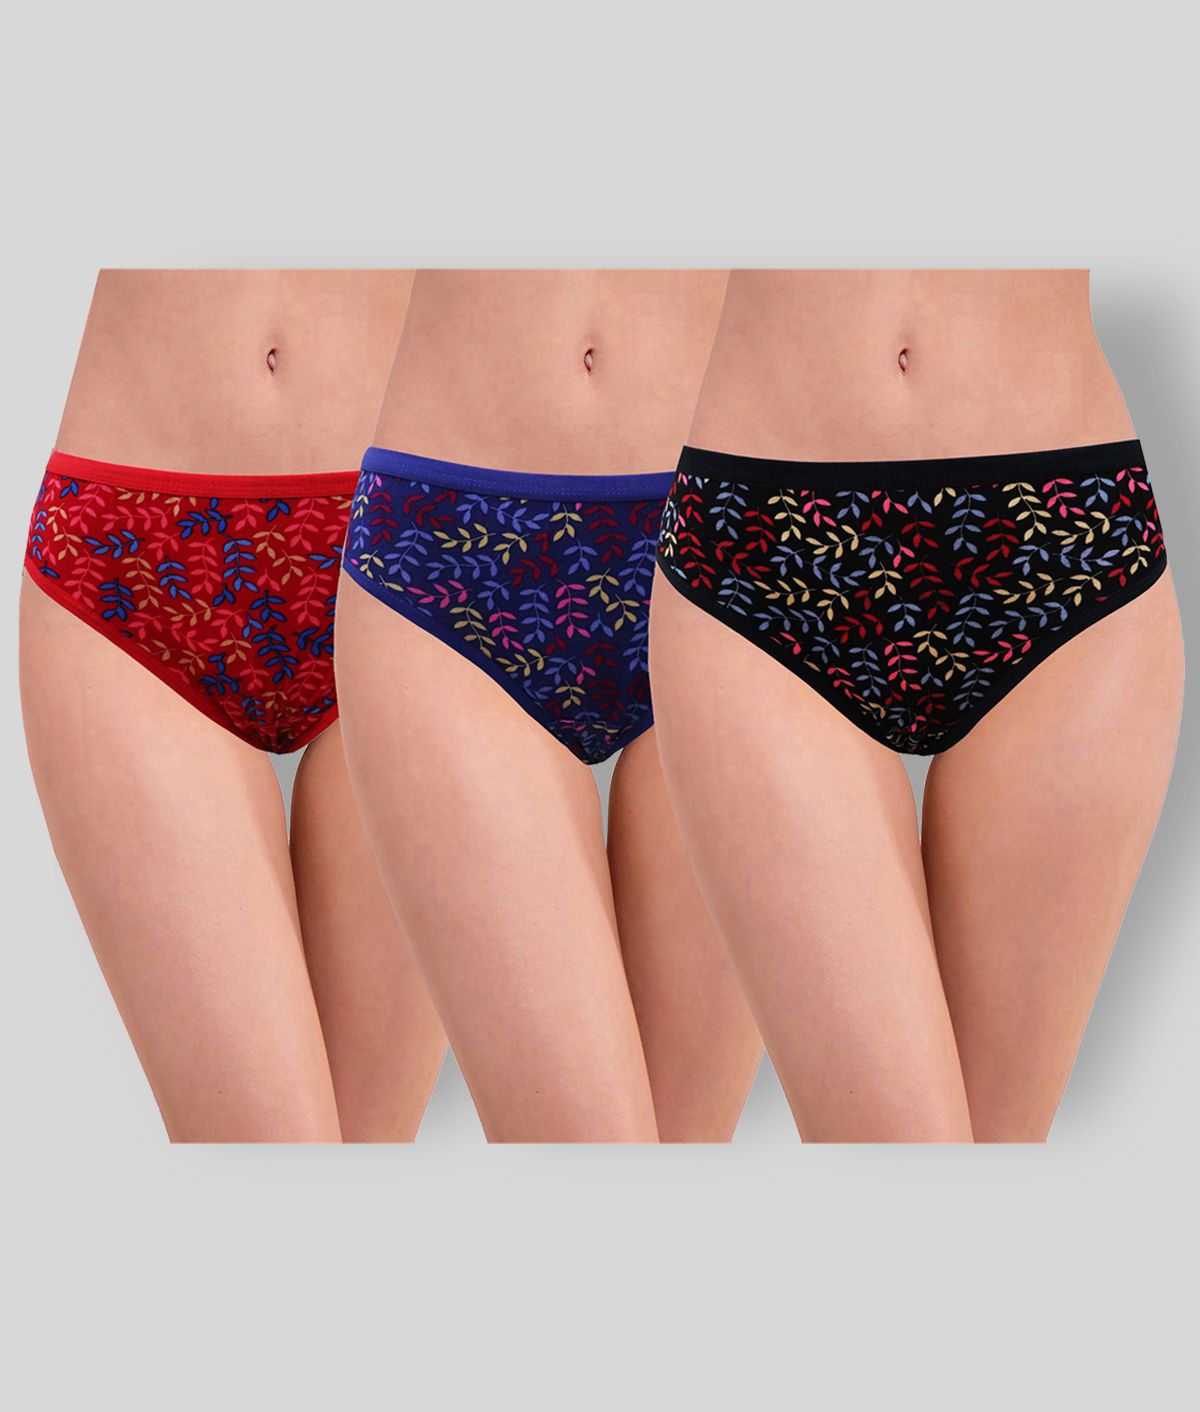     			RC. ROYAL CLASS - Multicolor Cotton Printed Women's Hipster ( Pack of 3 )